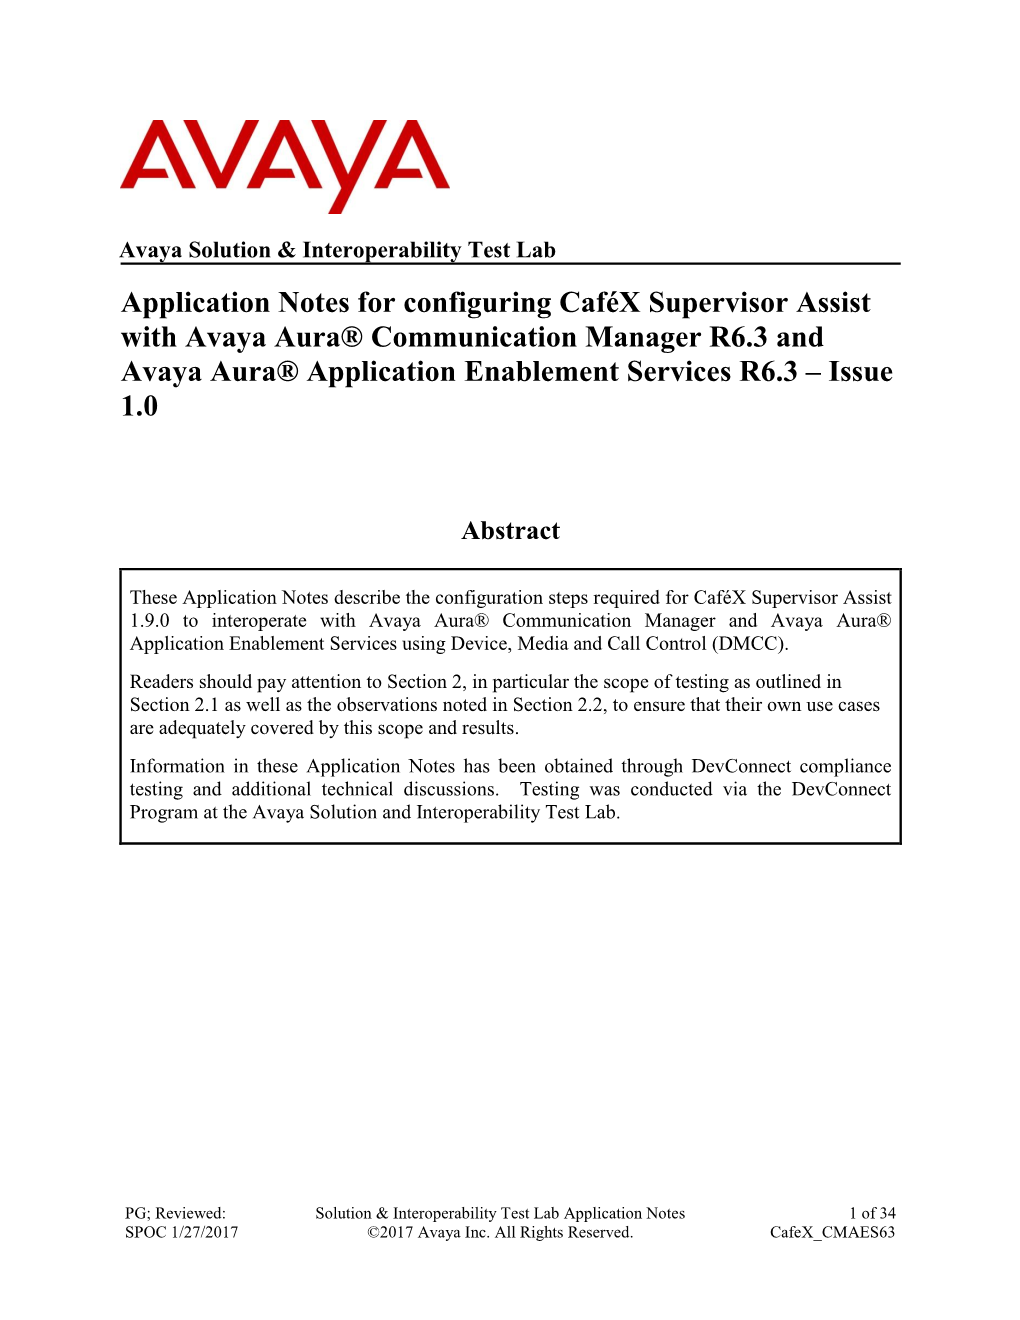 Application Notes for Configuring Caféx Supervisor Assist with Avaya Aura® Communication Manager R6.3 and Avaya Aura® Applica